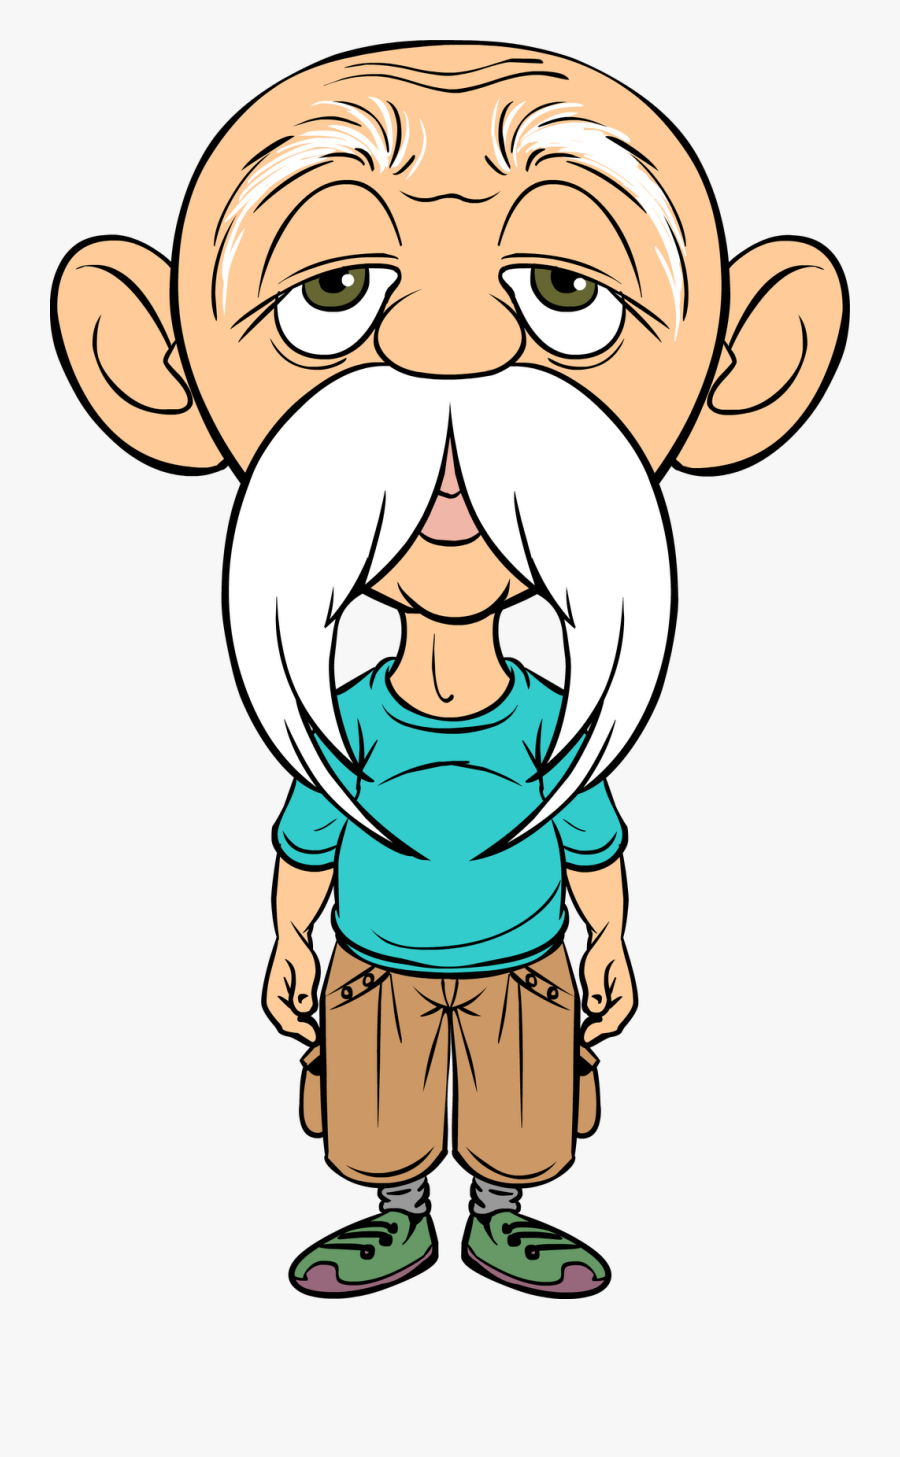 Old Man Clipart At Getdrawings - Funny Old Man Cartoon, Transparent Clipart